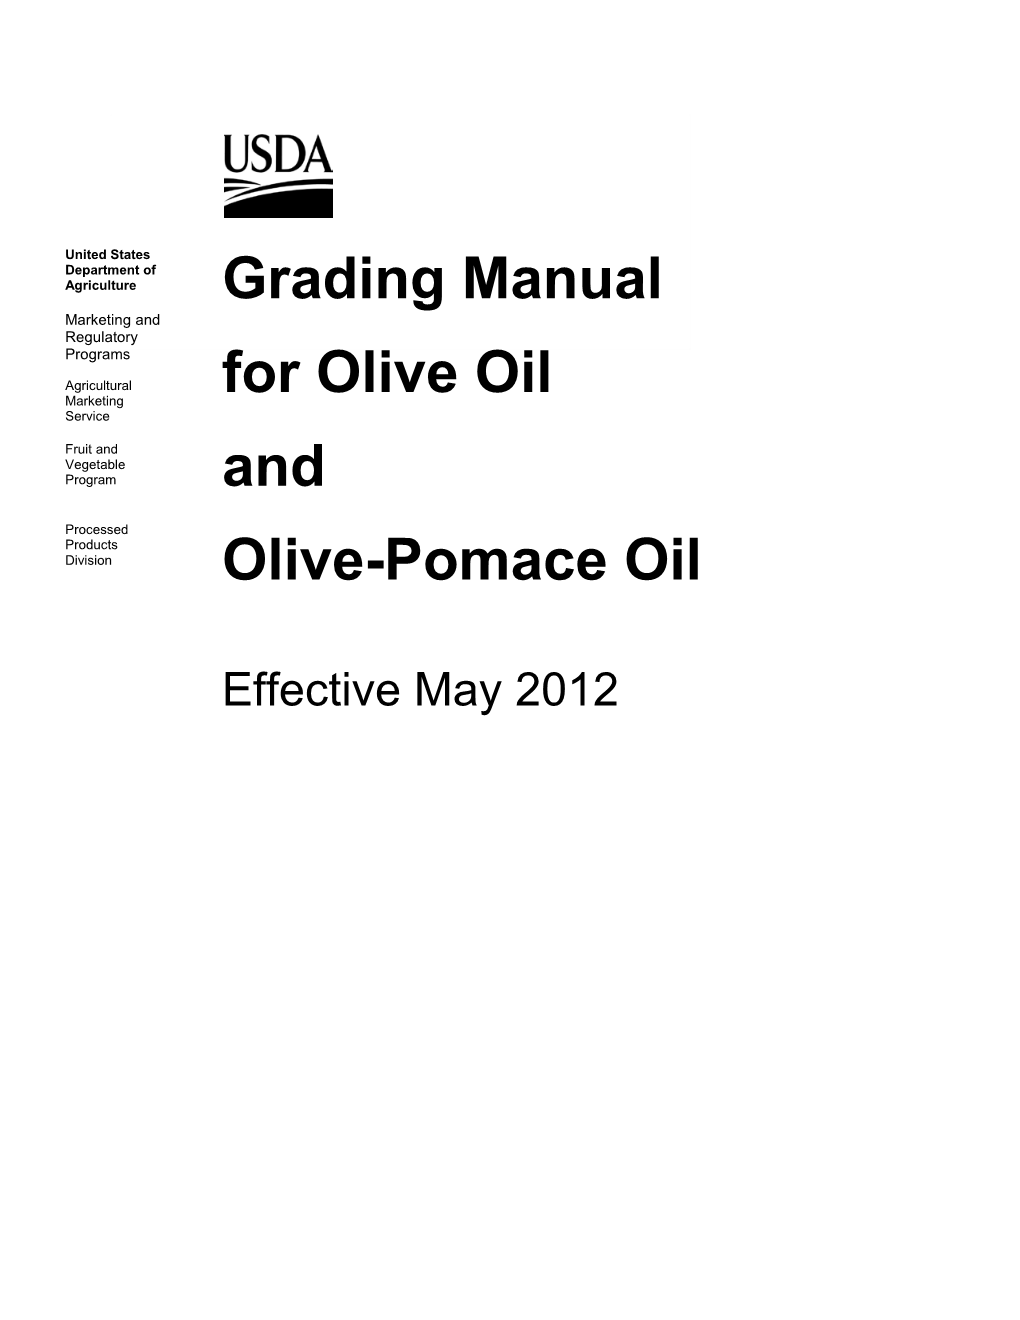 Inspection Instructions for Olive Oil and Olive-Pomace